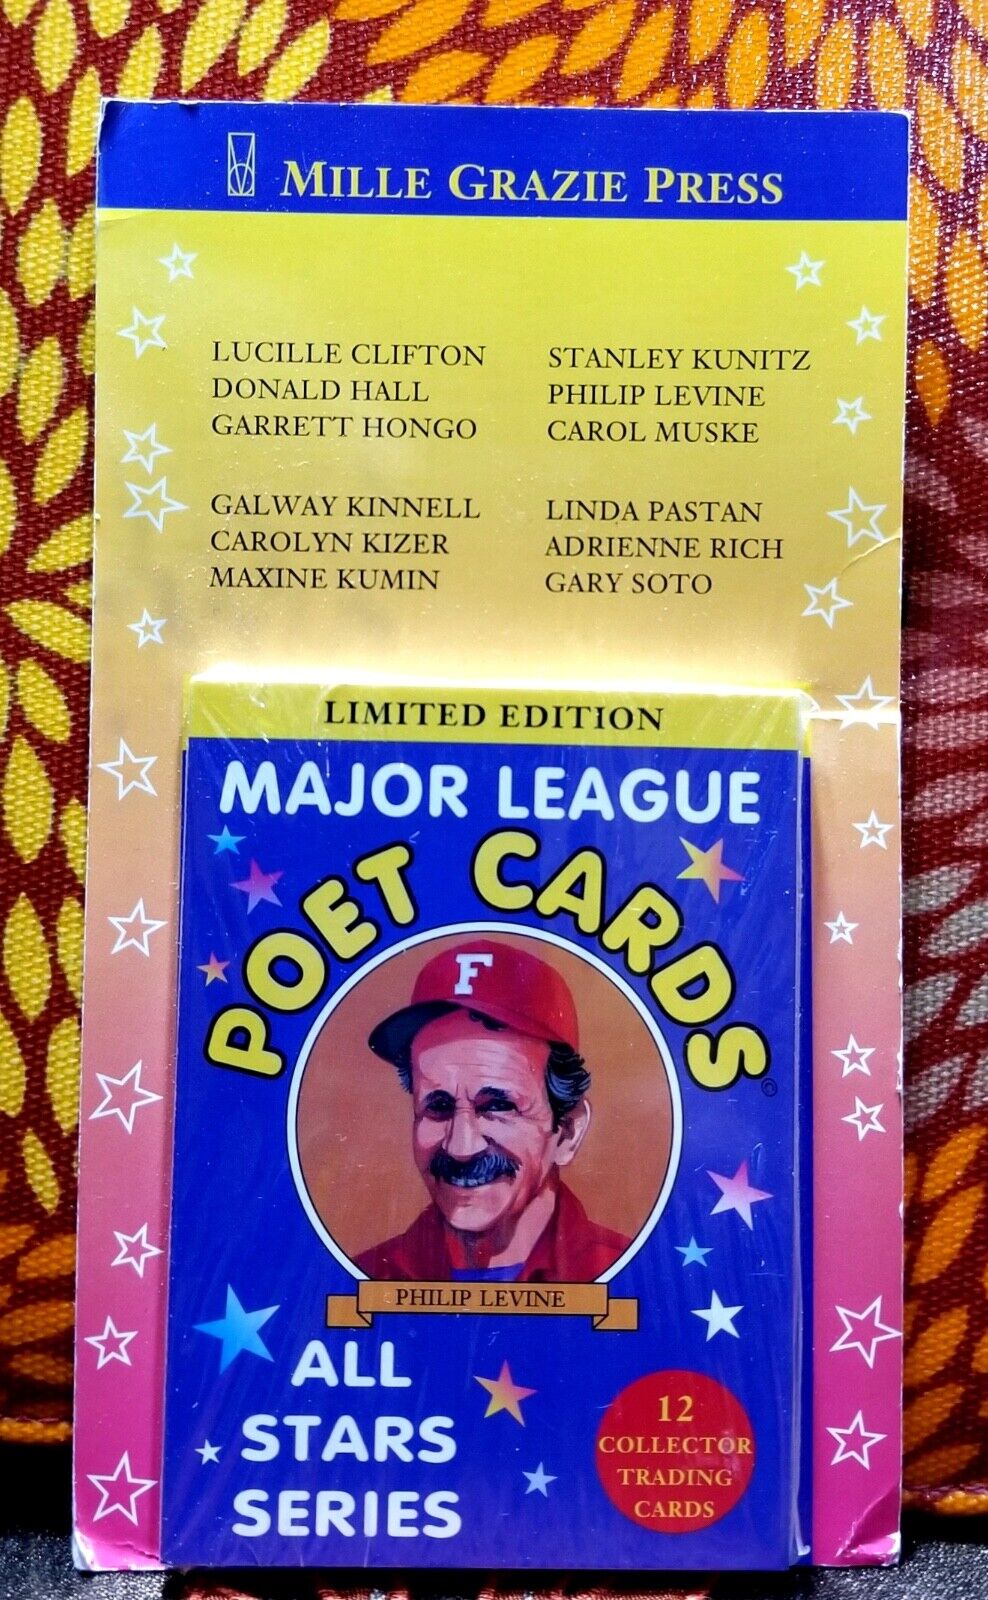 NEW VERY RARE Set of 12 Poet Cards Mille Grazie Limited Edition All Stars